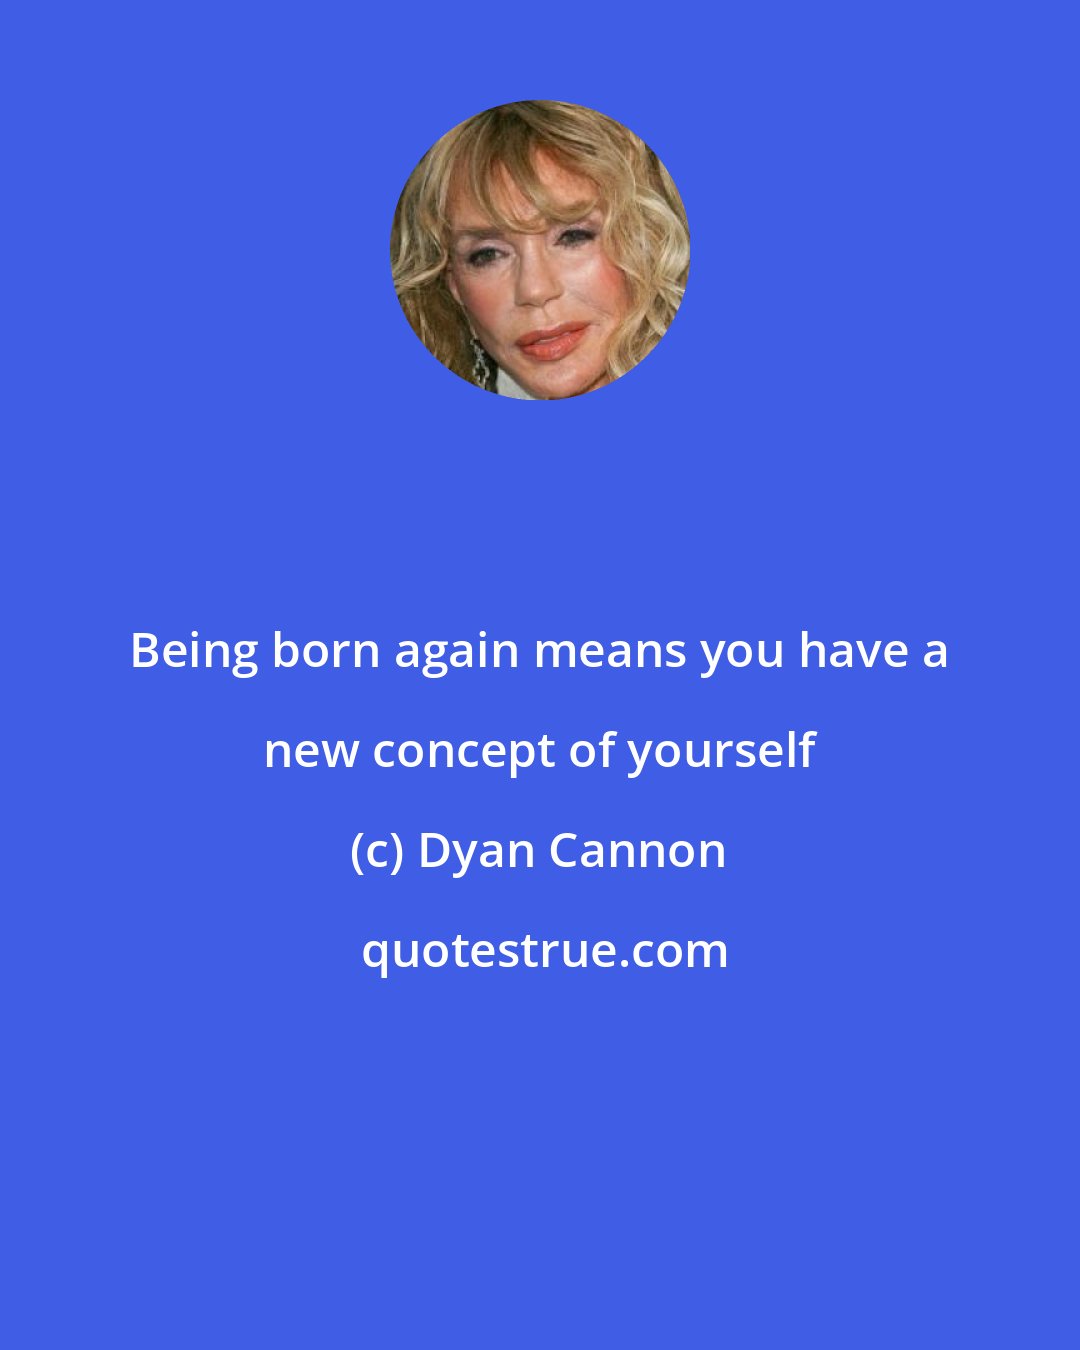 Dyan Cannon: Being born again means you have a new concept of yourself